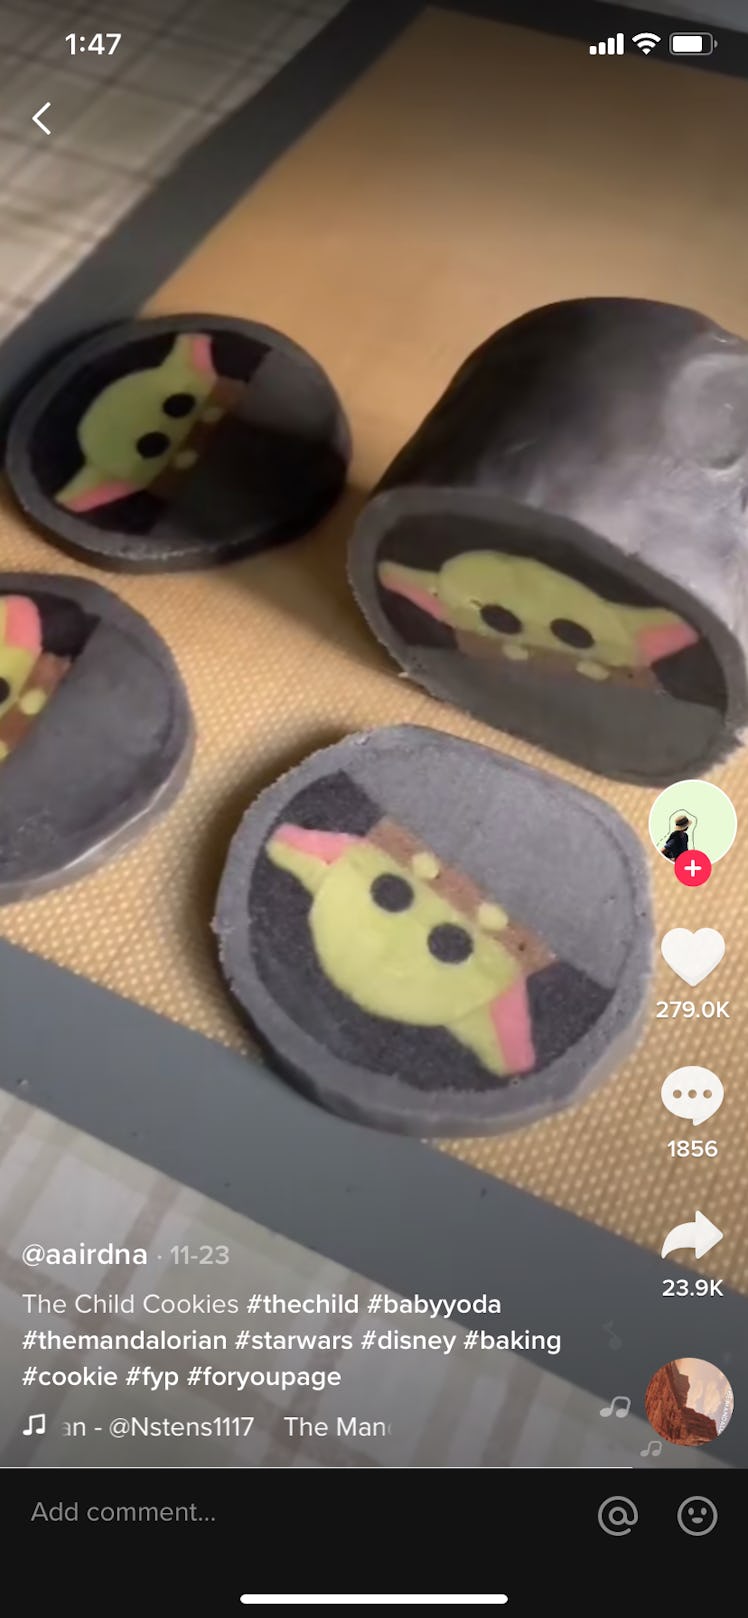 A TIkTok user forms colorful dough into an image of Baby Yoda riding in his shell.